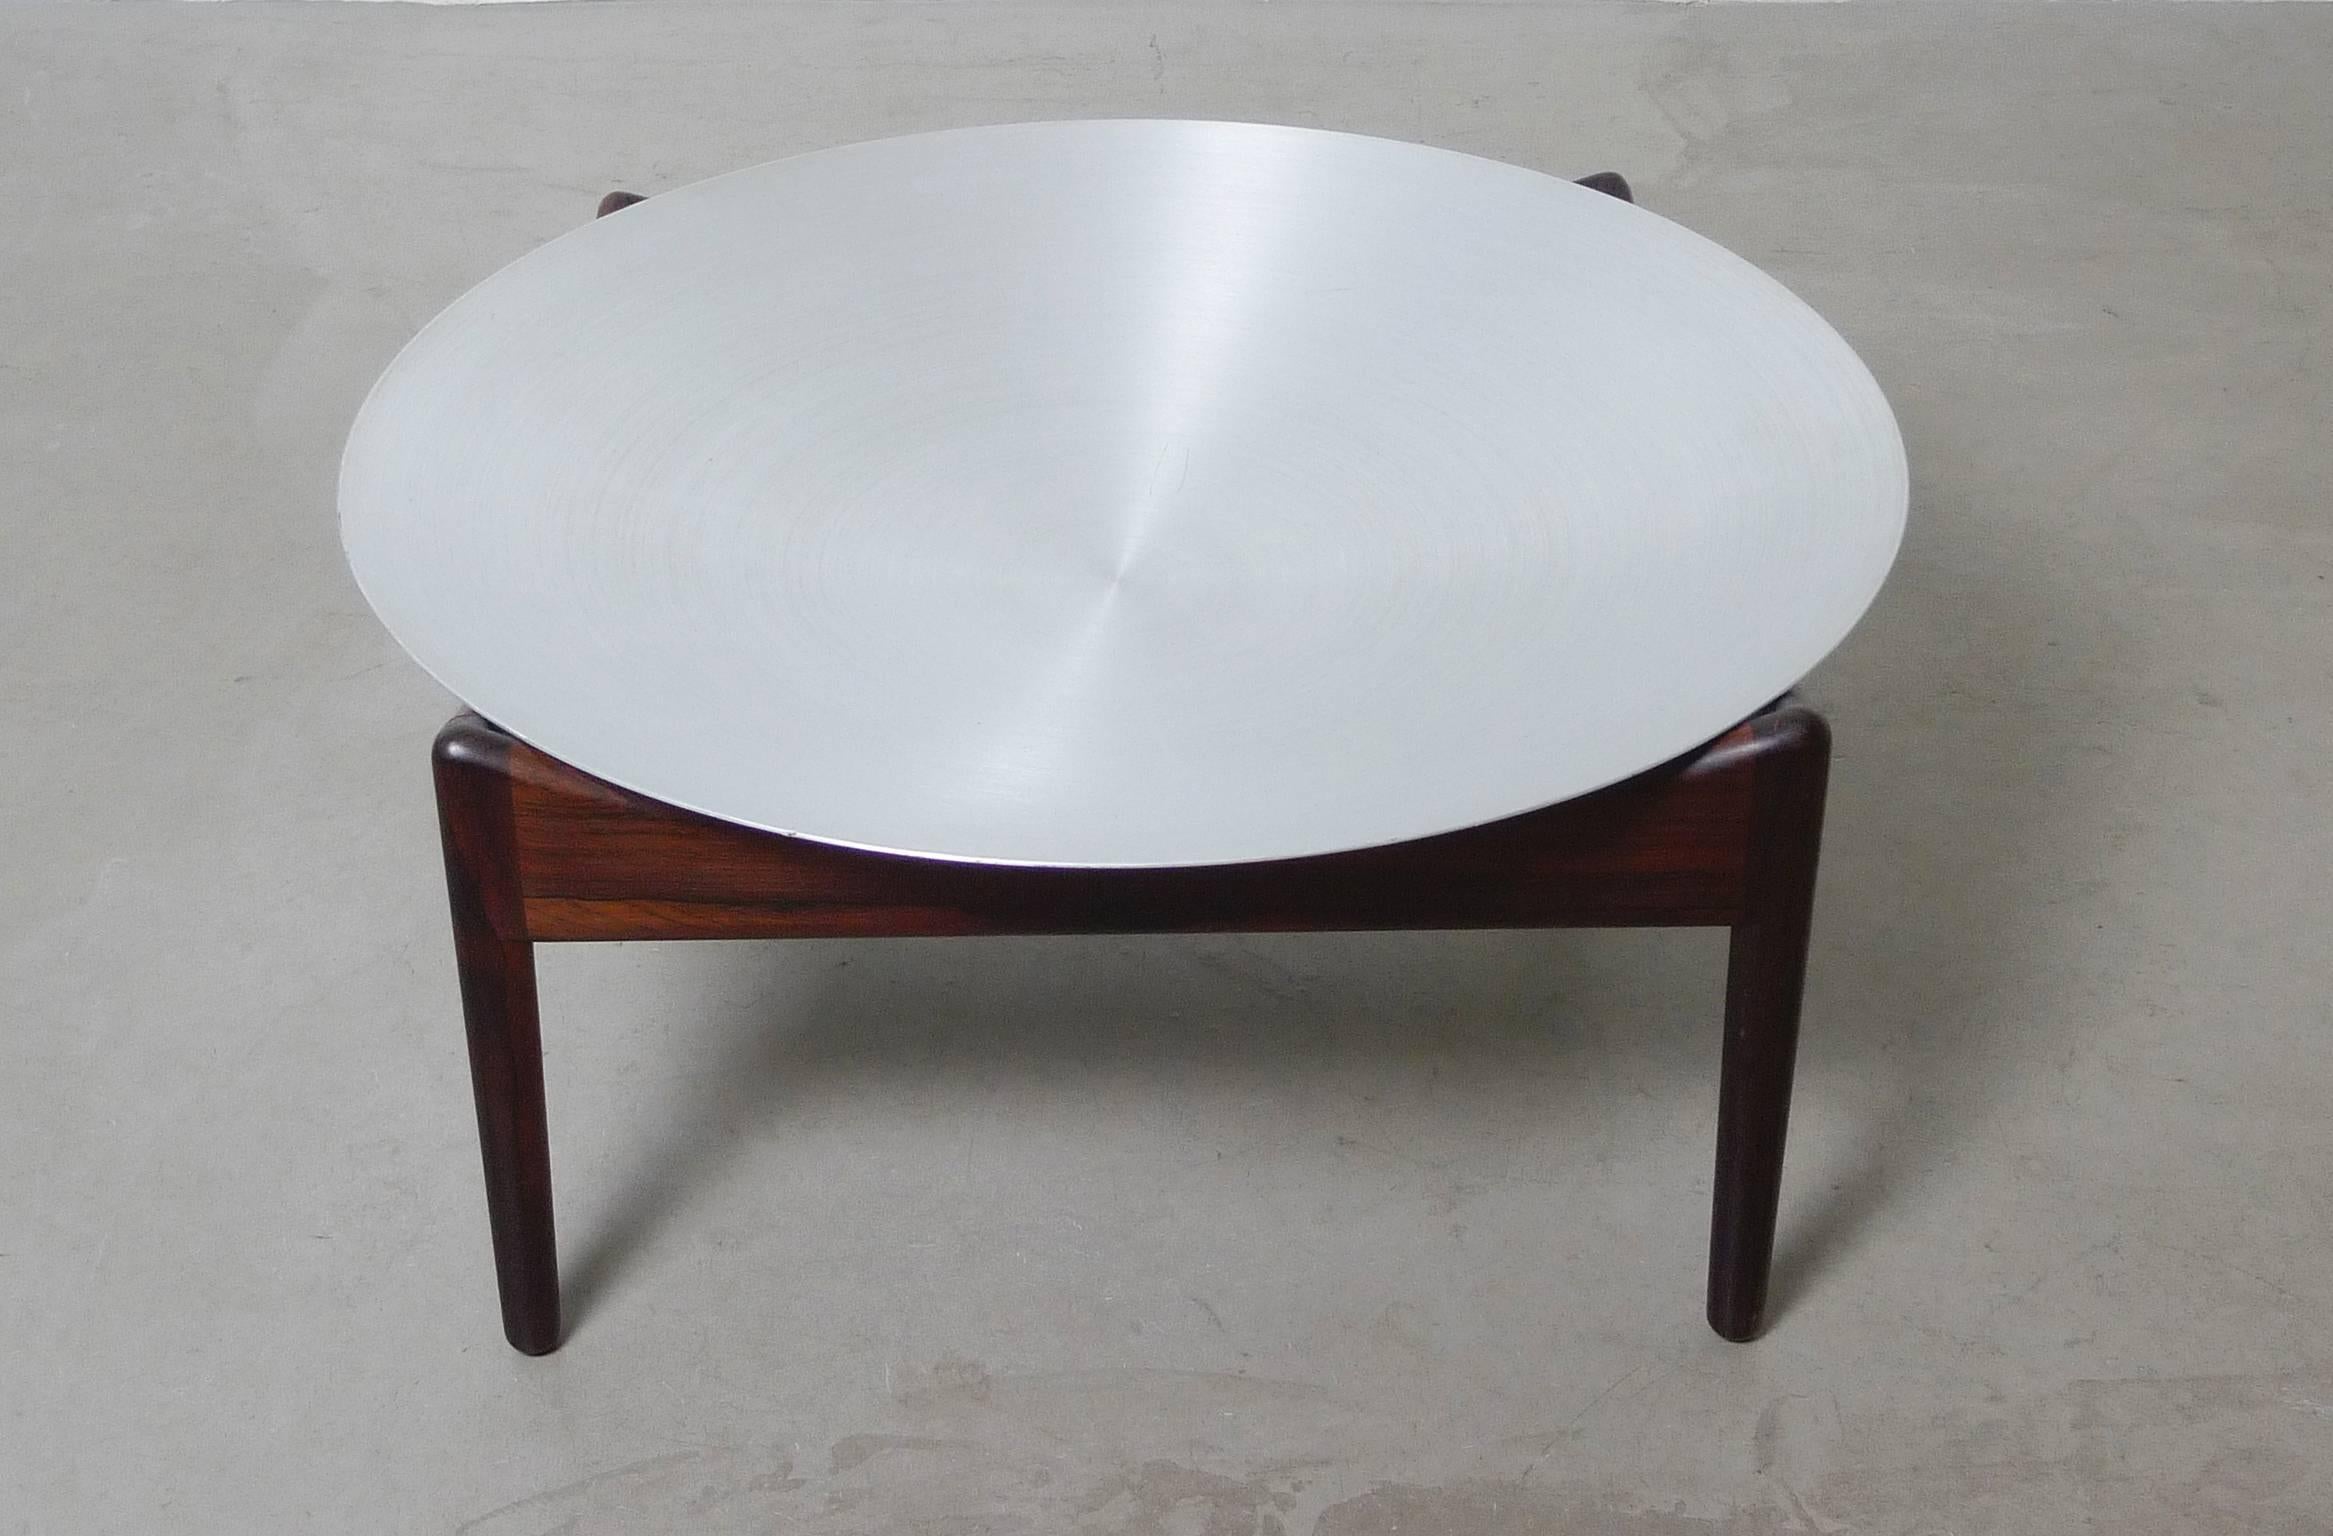 Large fruit bowl on rosewood stand by Kristian Solmer Vedel for So¨ren Willadsen, Denmark, 1960s. This rare object is in a very good condition.